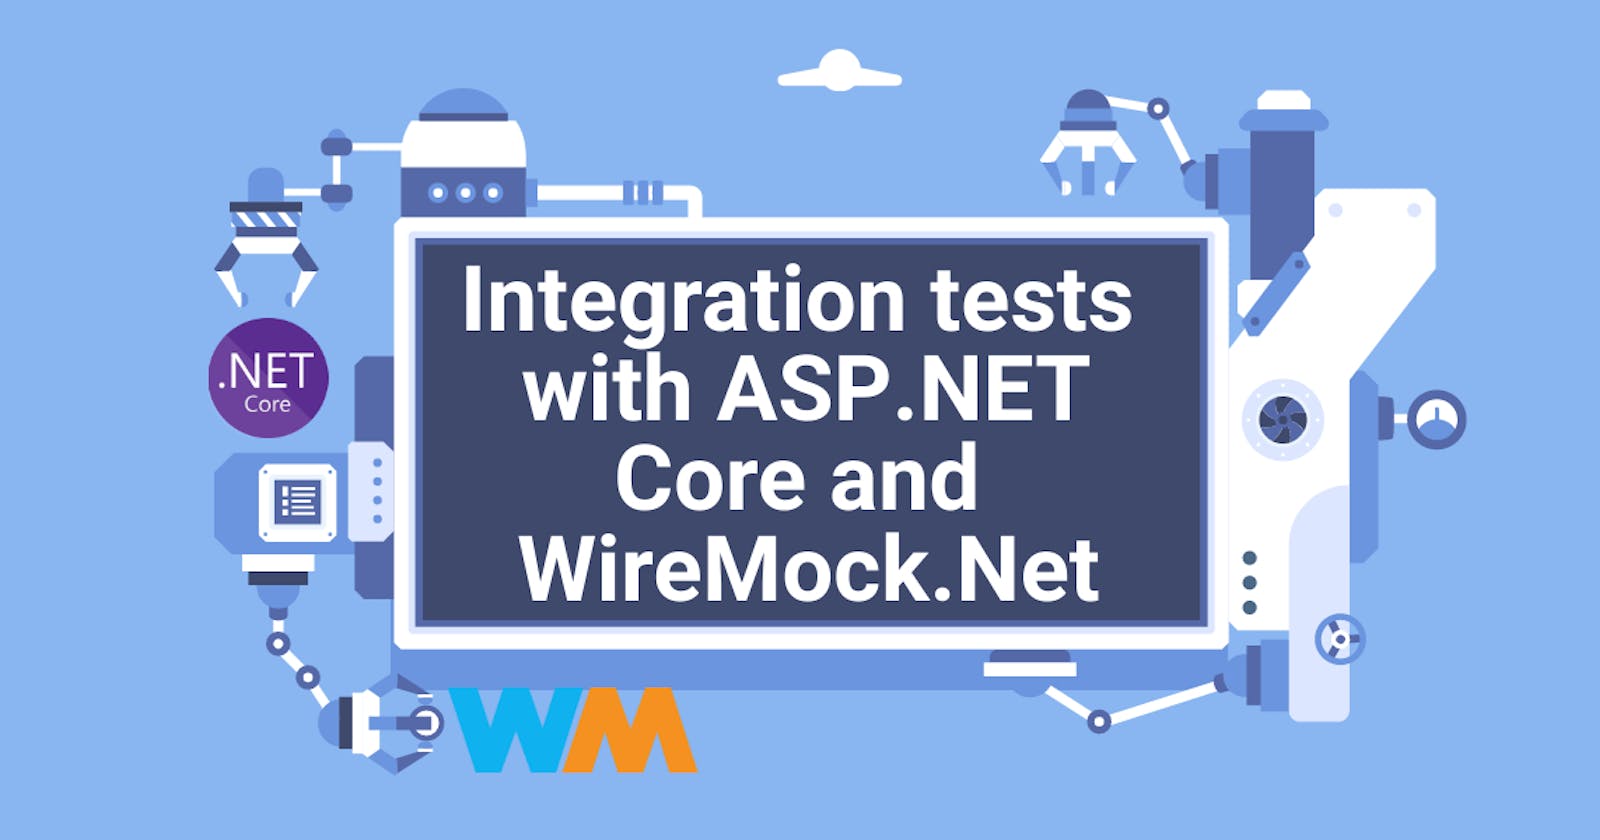 Integration tests without API dependencies with ASP.NET Core and WireMock.Net